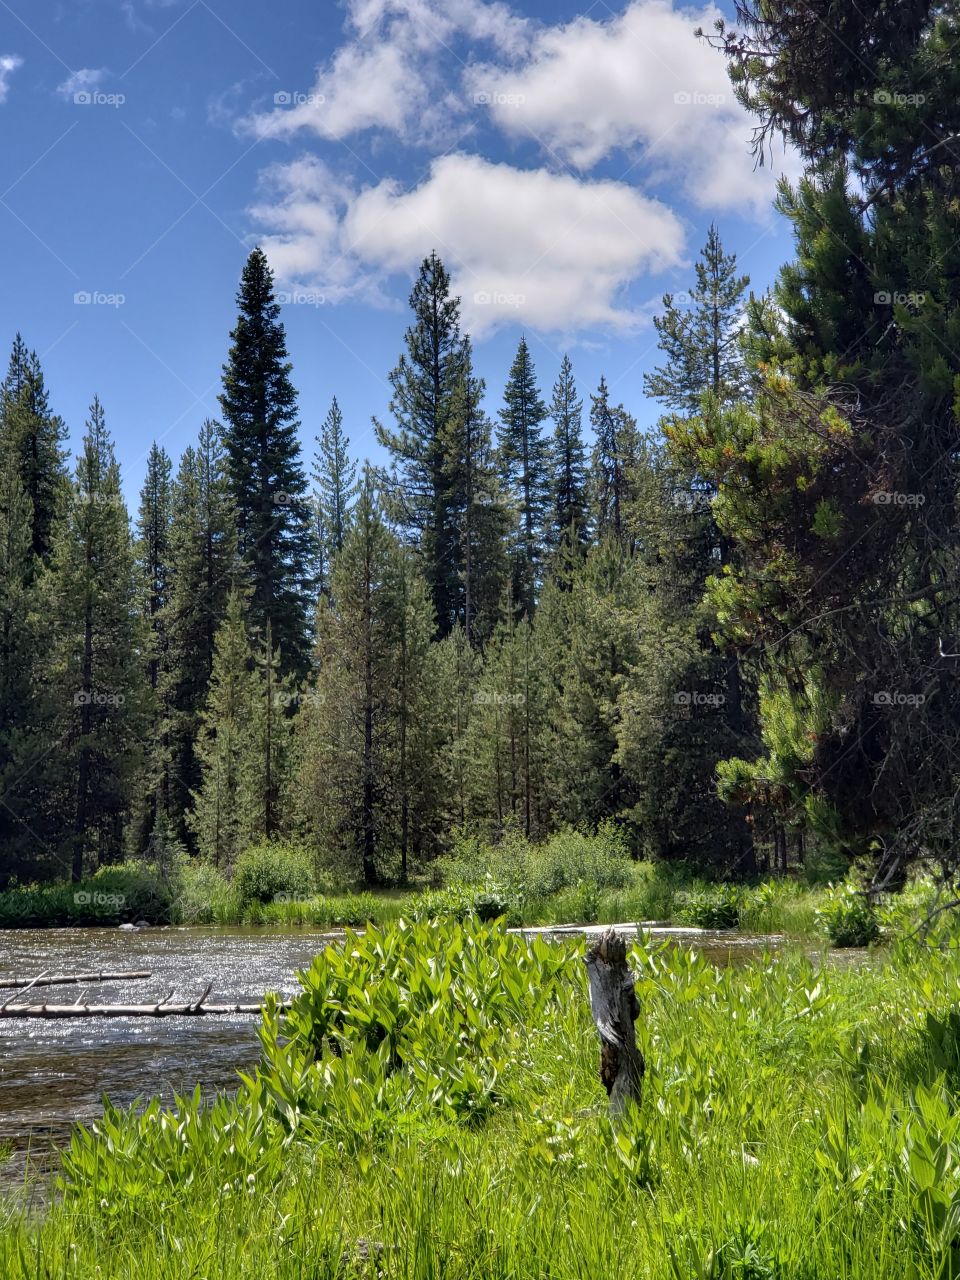 A beautiful summer day in the woods of Oregon with a sunny blue sky, lush green forest, and the Deschutes River.